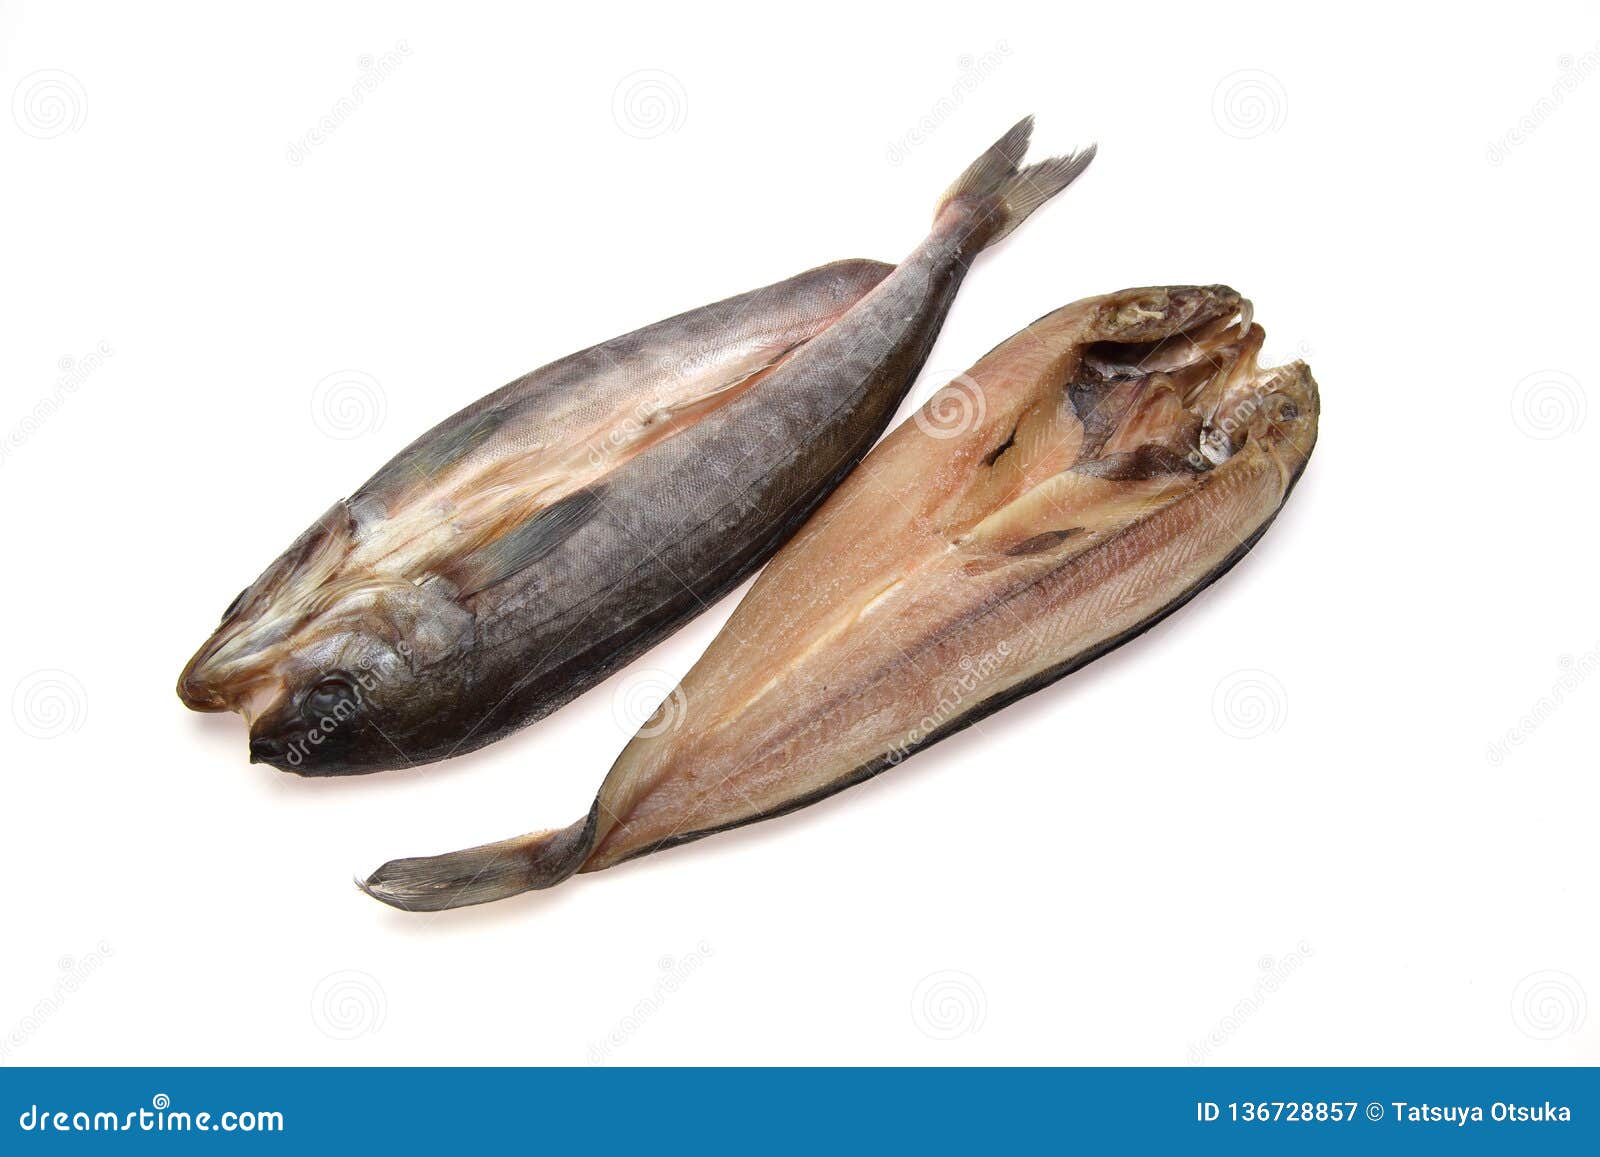 cut open and dried atka mackerel in white background